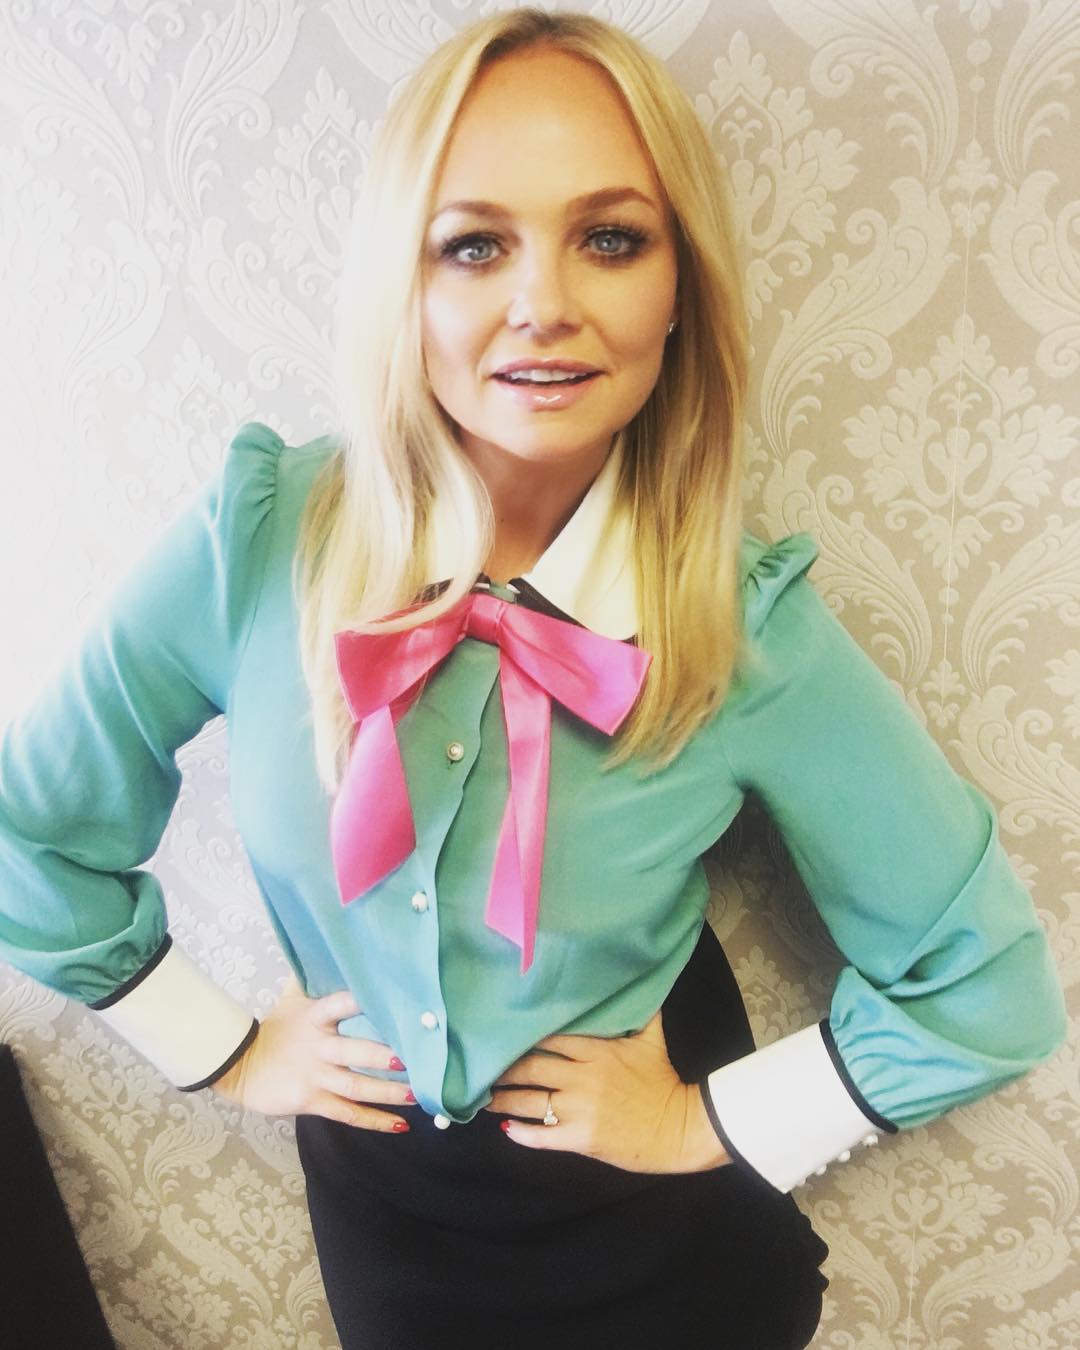 49 Hot Pictures Of Emma Bunton Are Slices Of Heaven On Earth | Best Of Comic Books